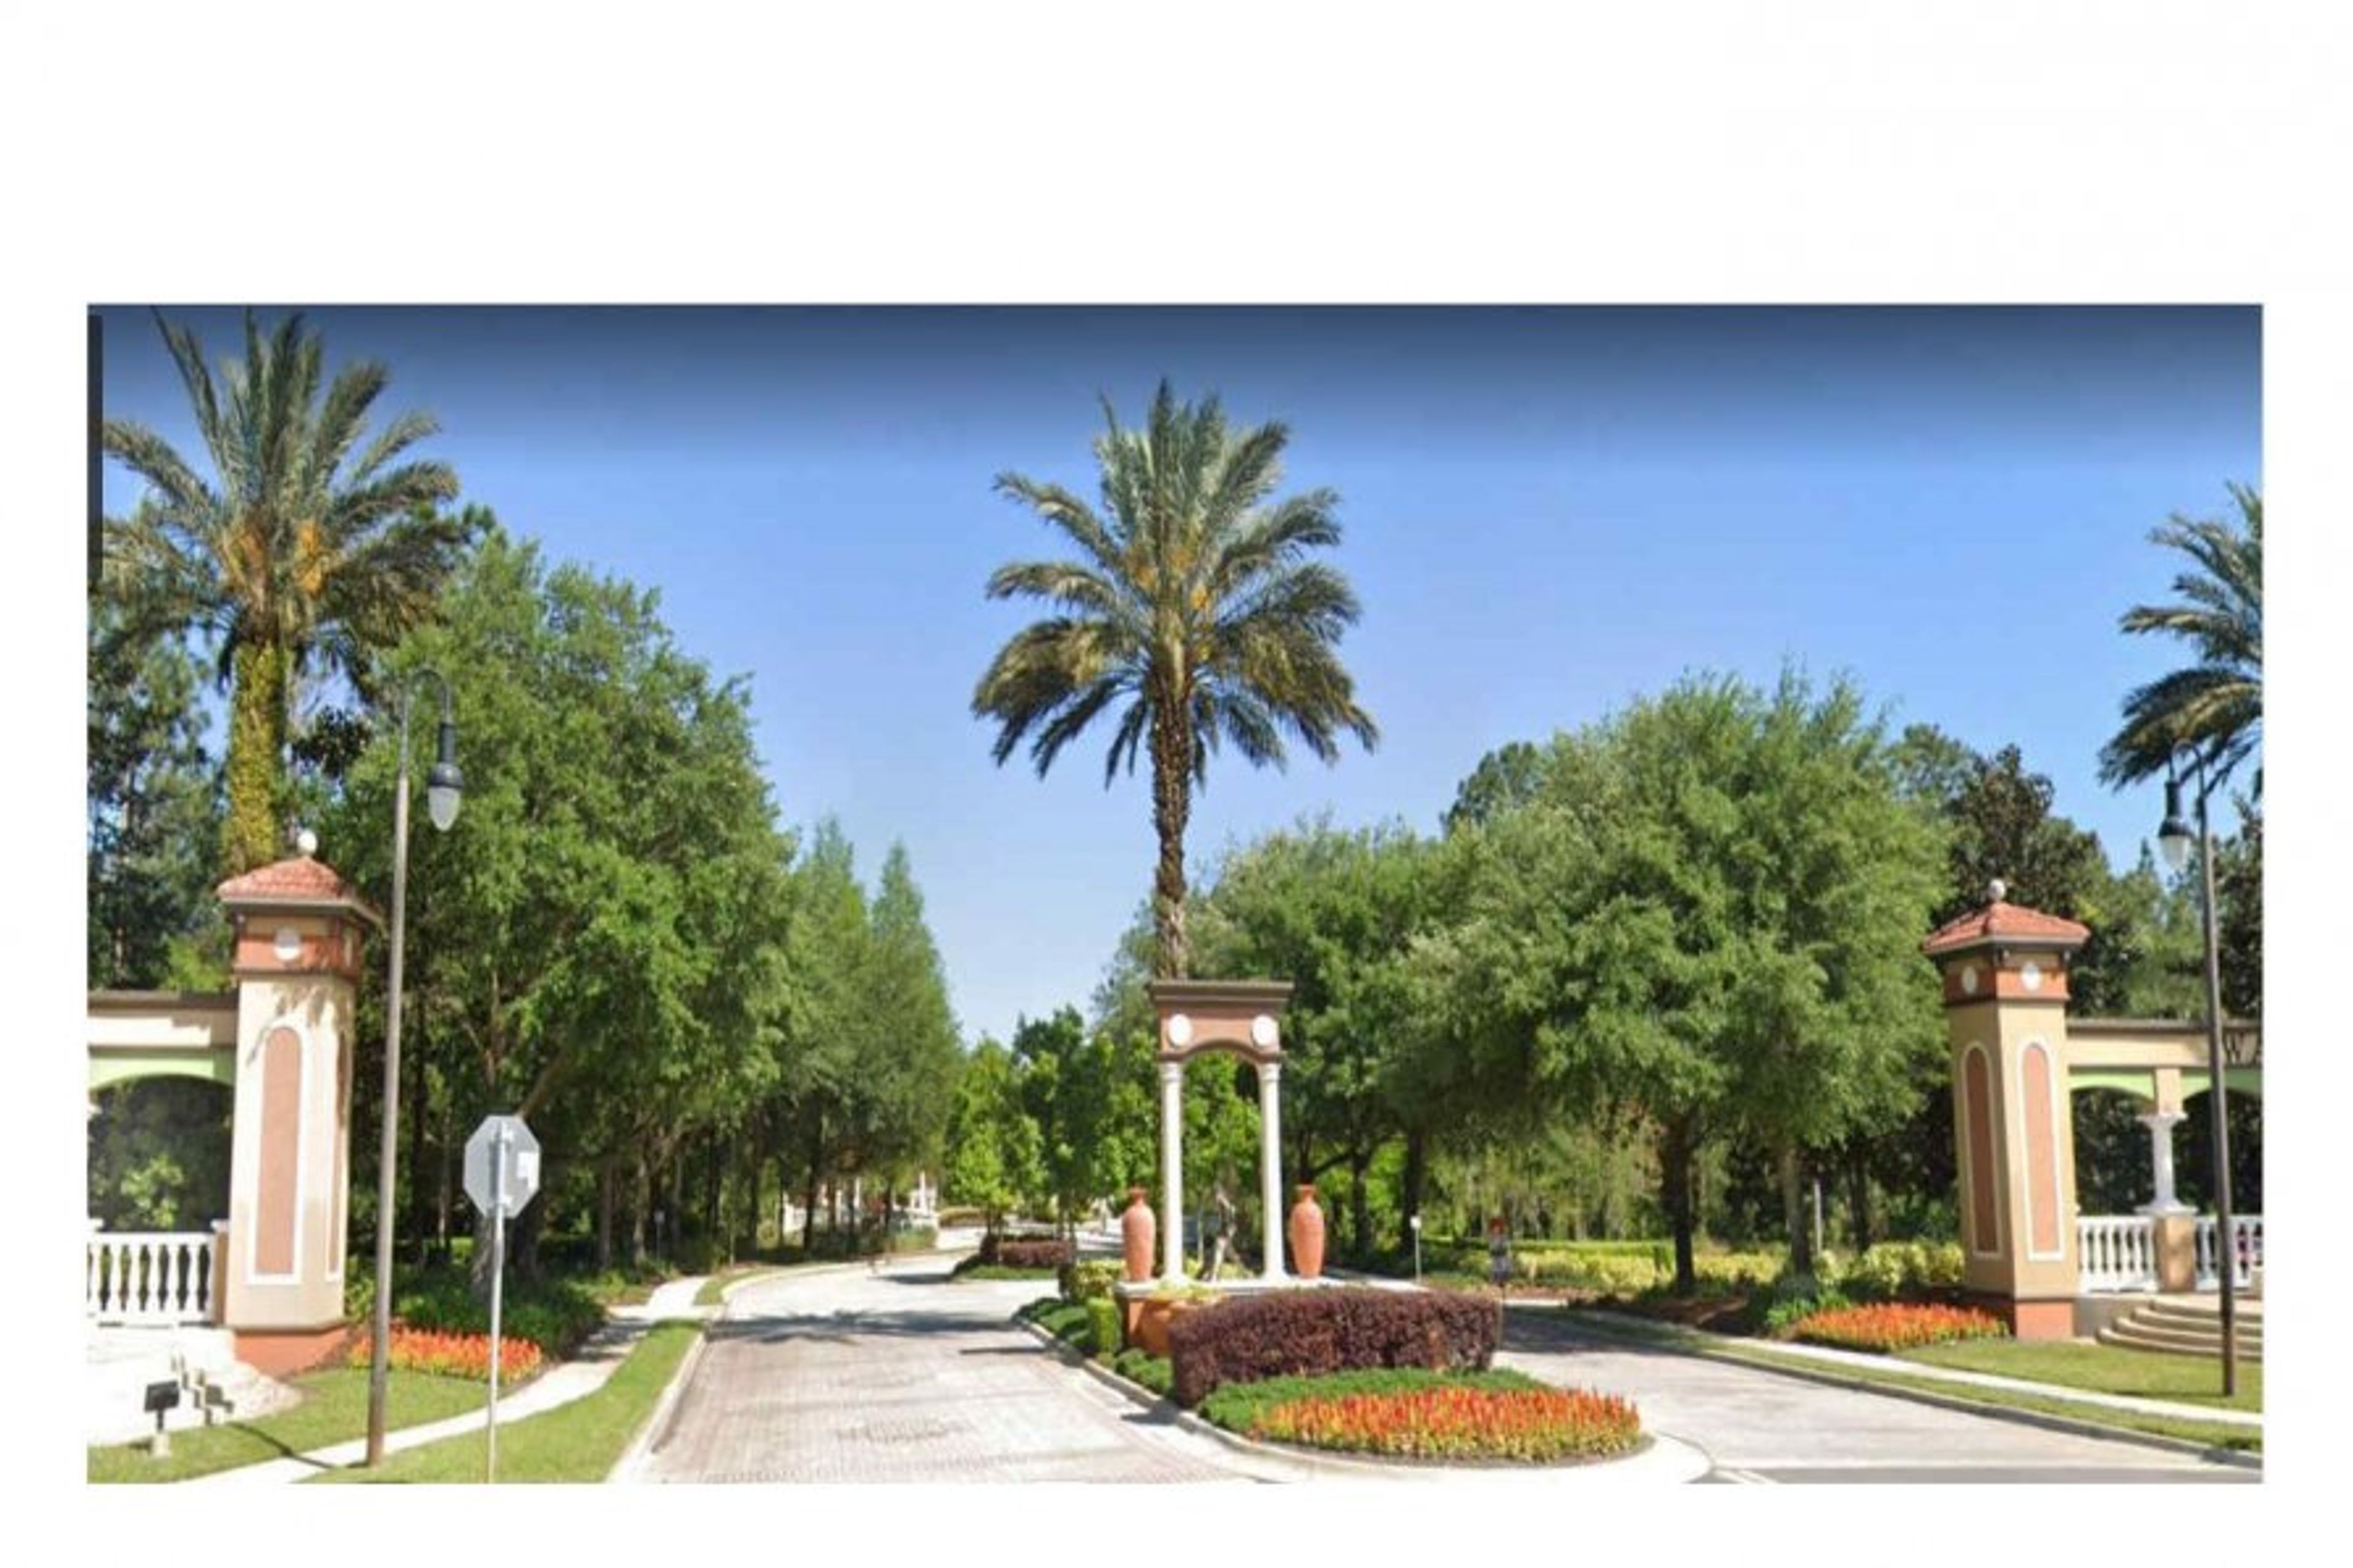 Entrance to Watersong Resort, Davenport, central Florida
